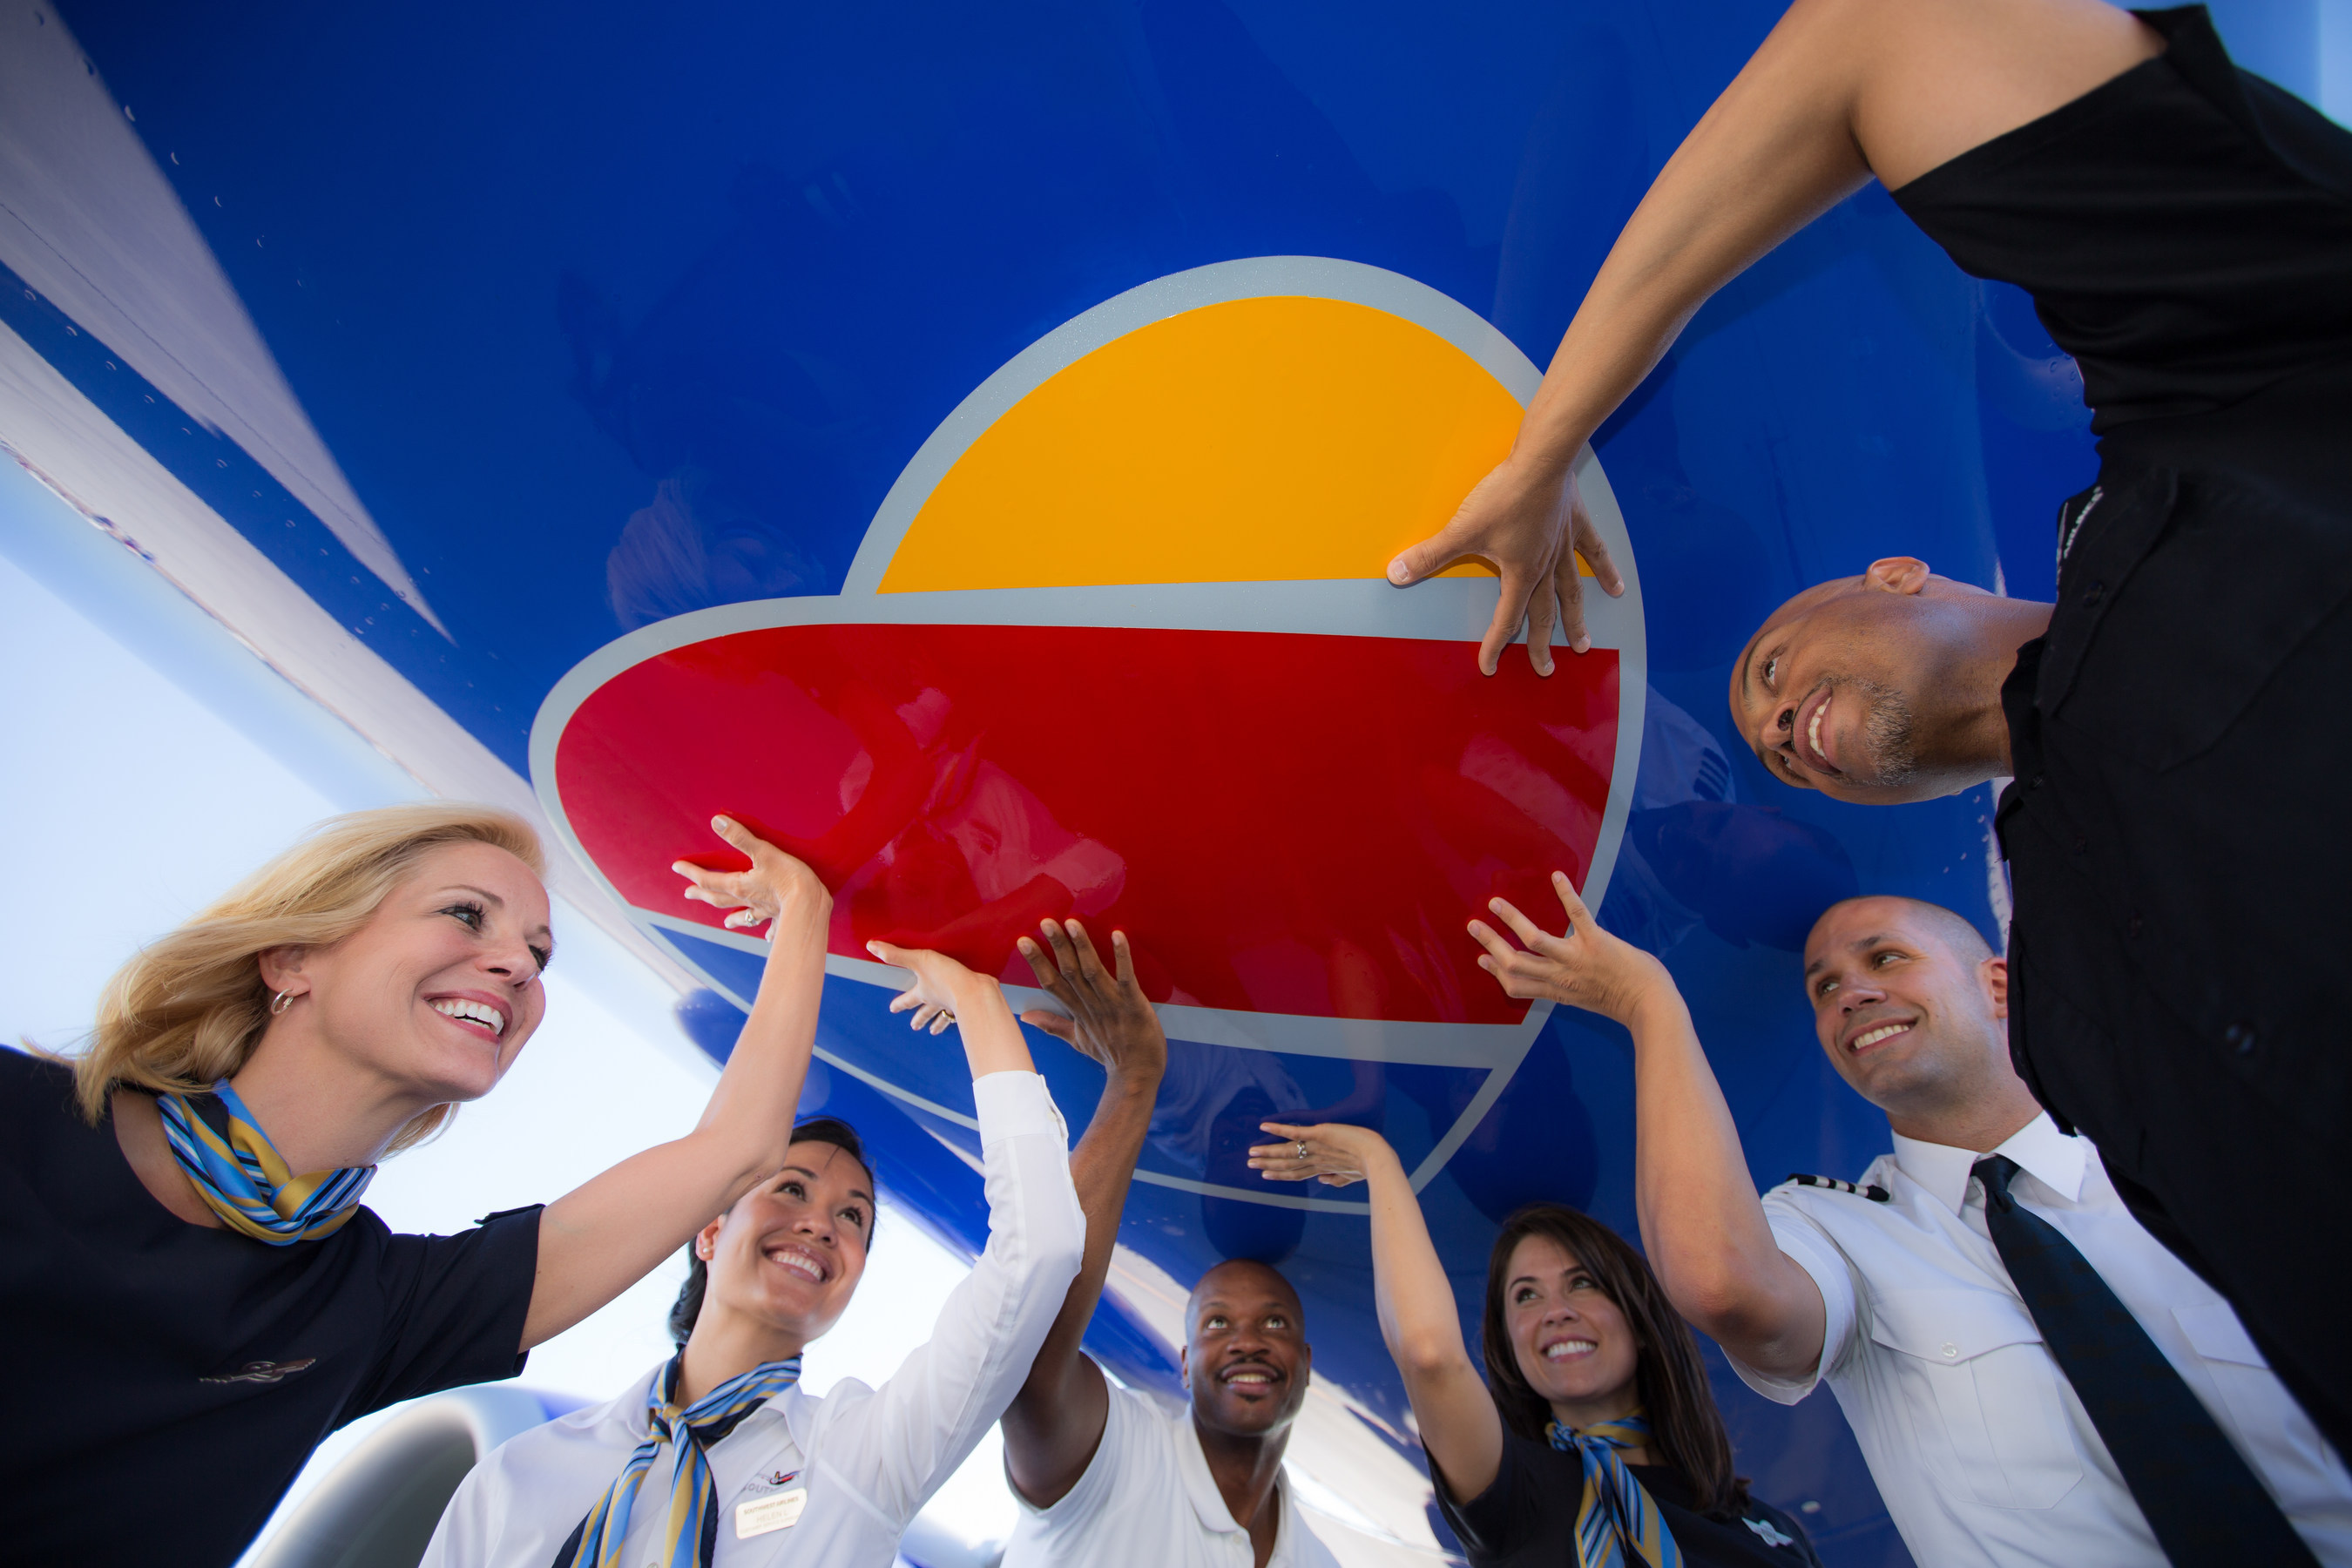 Southwest Airlines' Bold Look; Same #SouthwestHeart (PRNewsFoto/Southwest Airlines) (PRNewsFoto/Southwest Airlines)